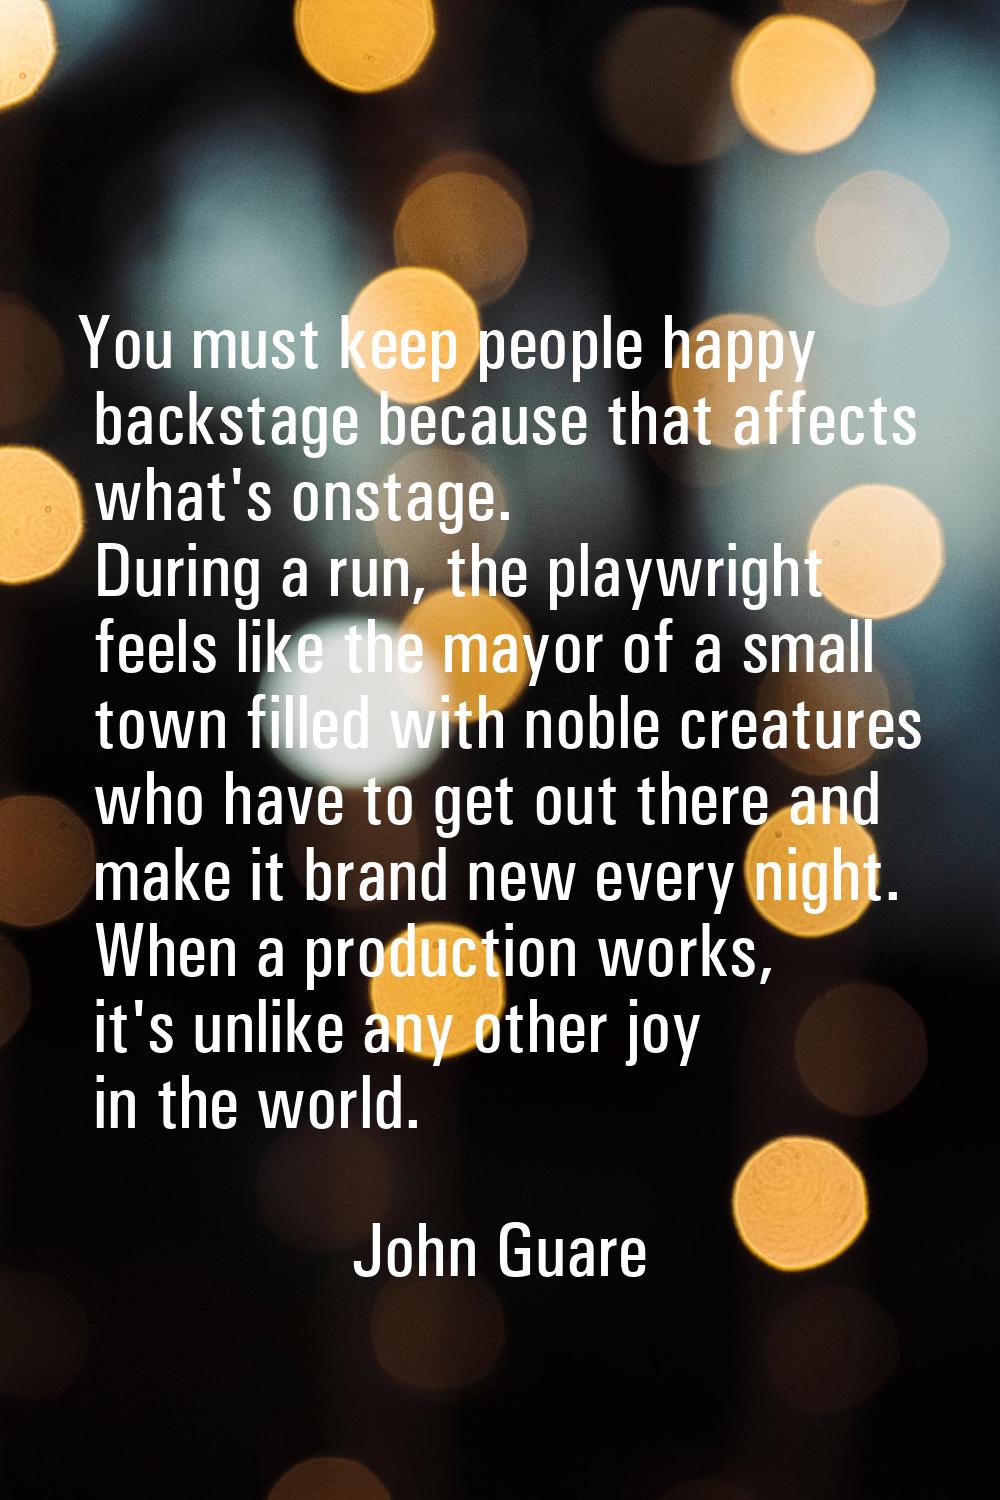 You must keep people happy backstage because that affects what's onstage. During a run, the playwri